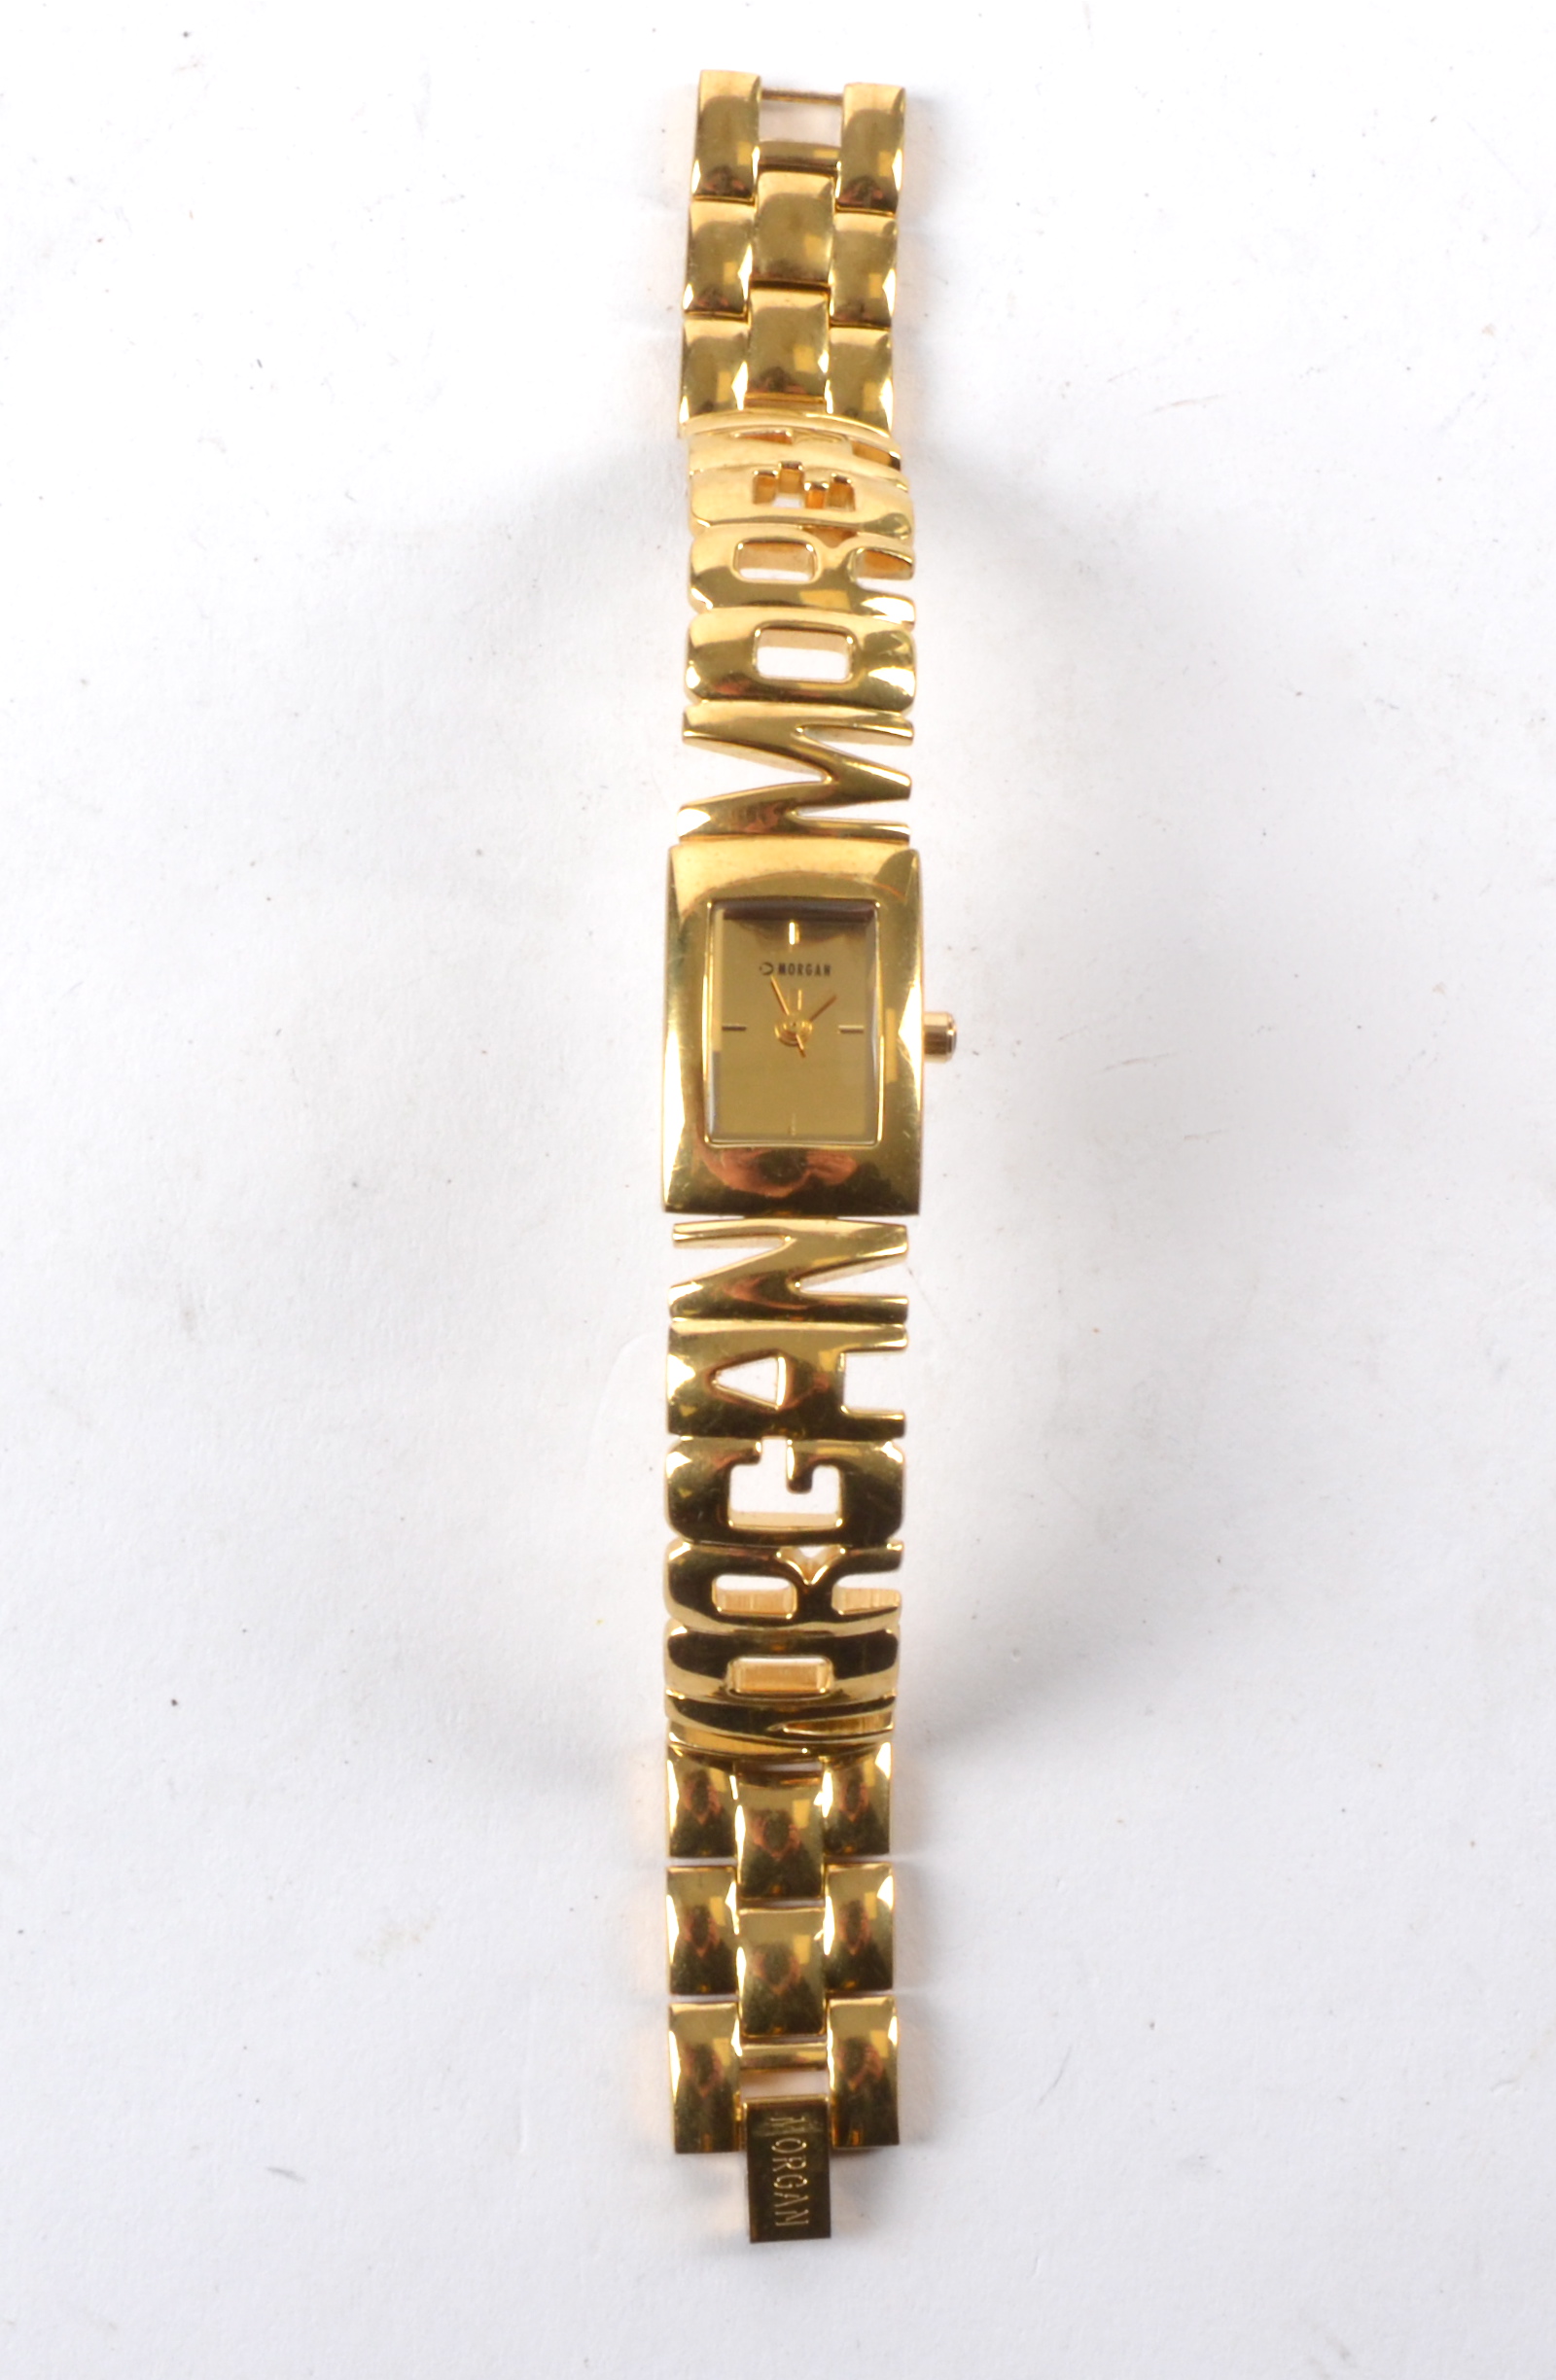 A Morgan De Toi costume jewellery wristwatch, the watch on a branded logo chain-link 'Morgan' with